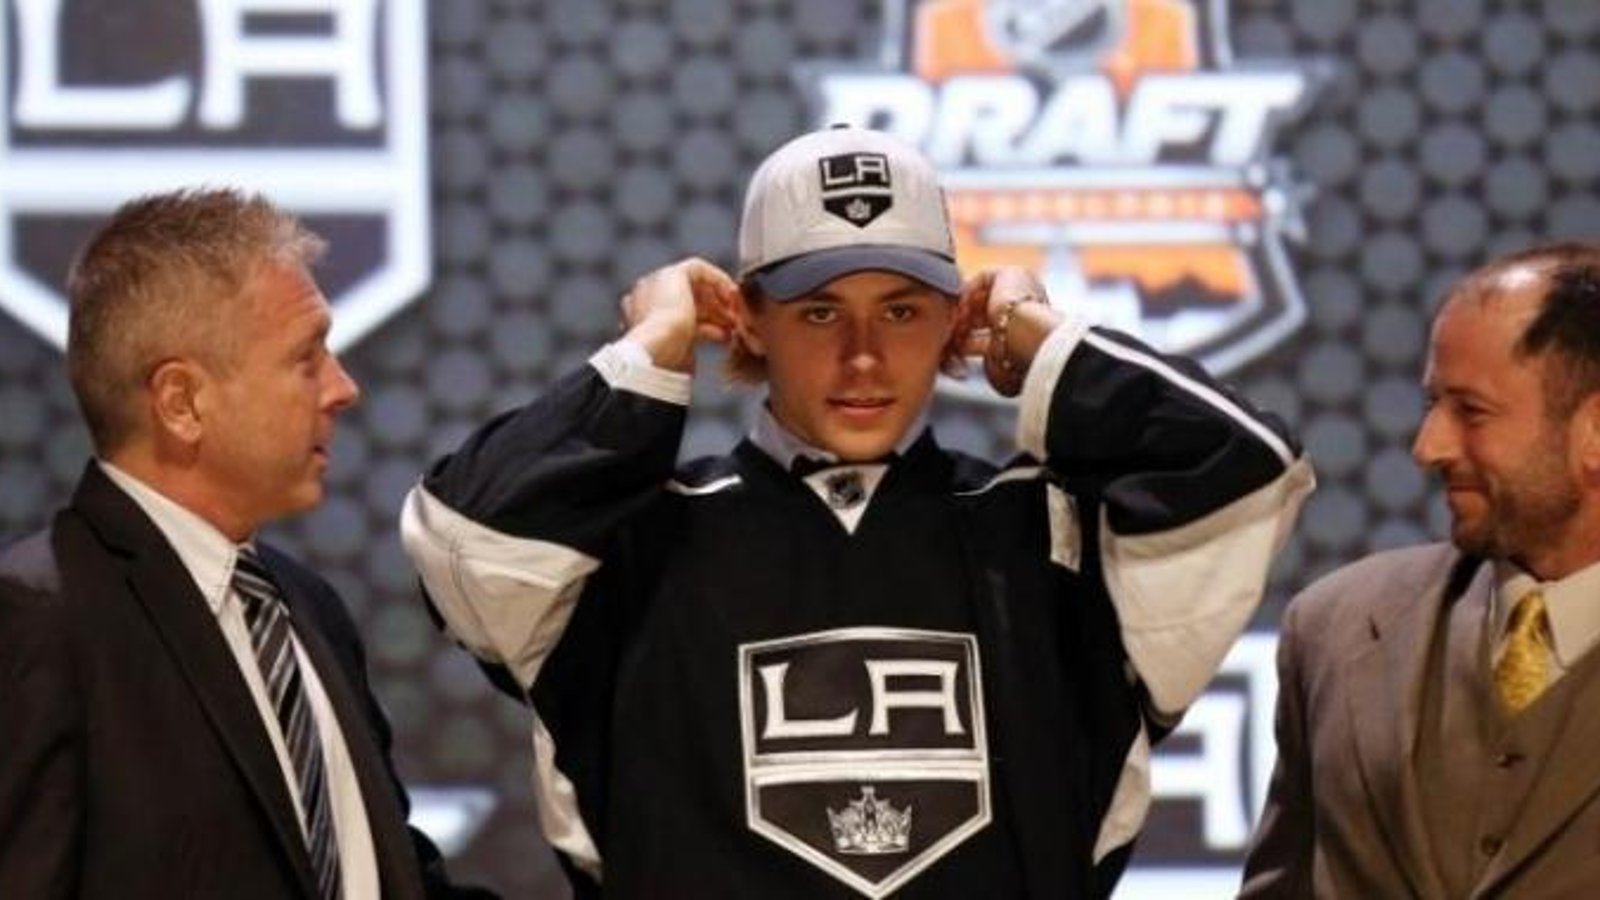 Can Adrian Kempe become the next superstar for the Kings?